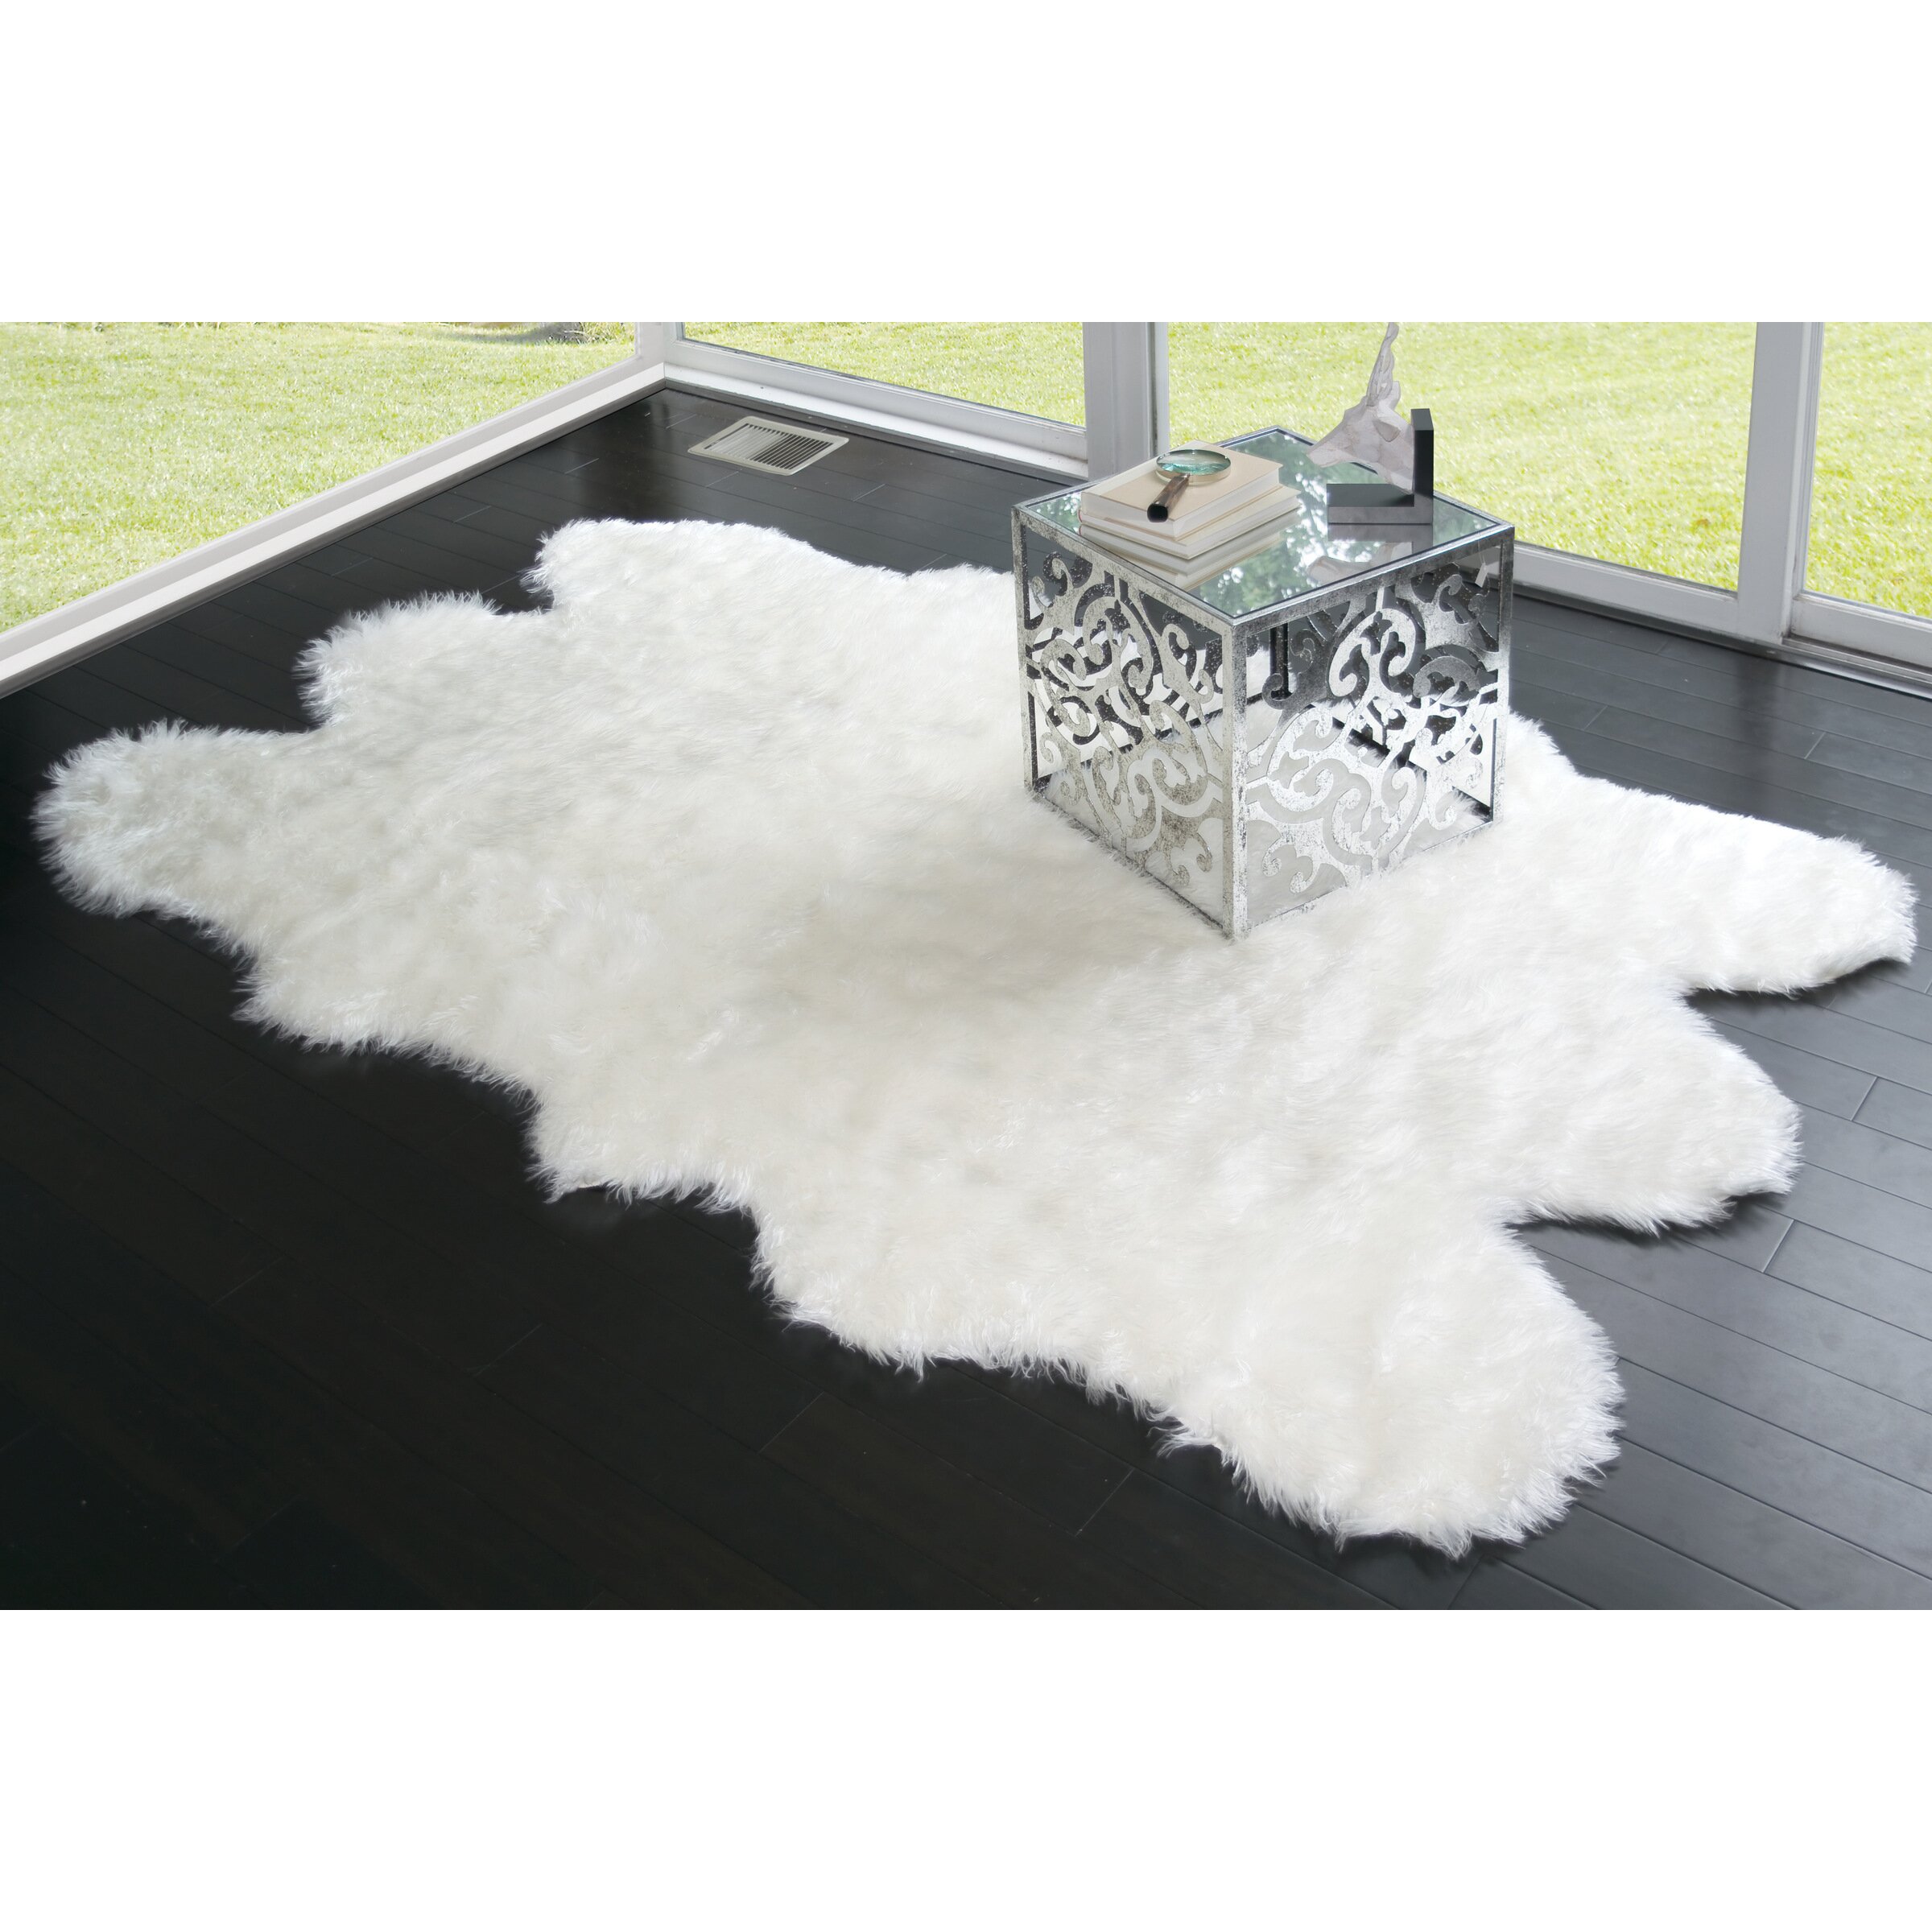 White Area Rug Black And White Area Rugs 3x5 Ikat Rug Without